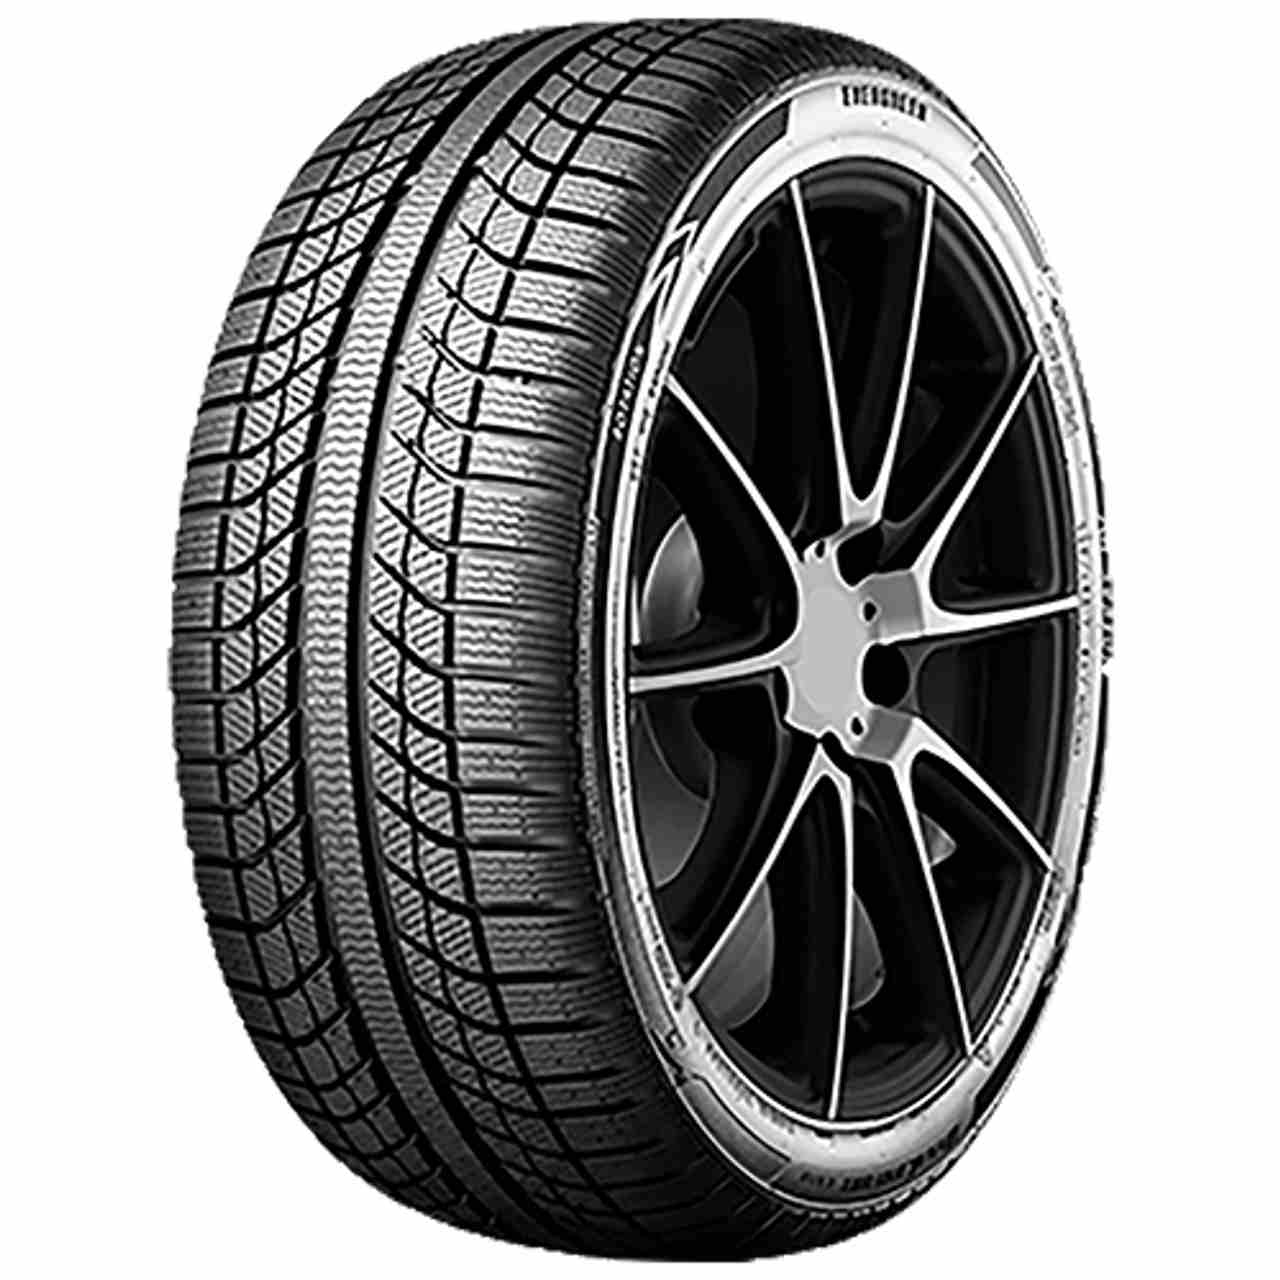 EVERGREEN DYNACOMFORT EA719 195/55R15 85H BSW